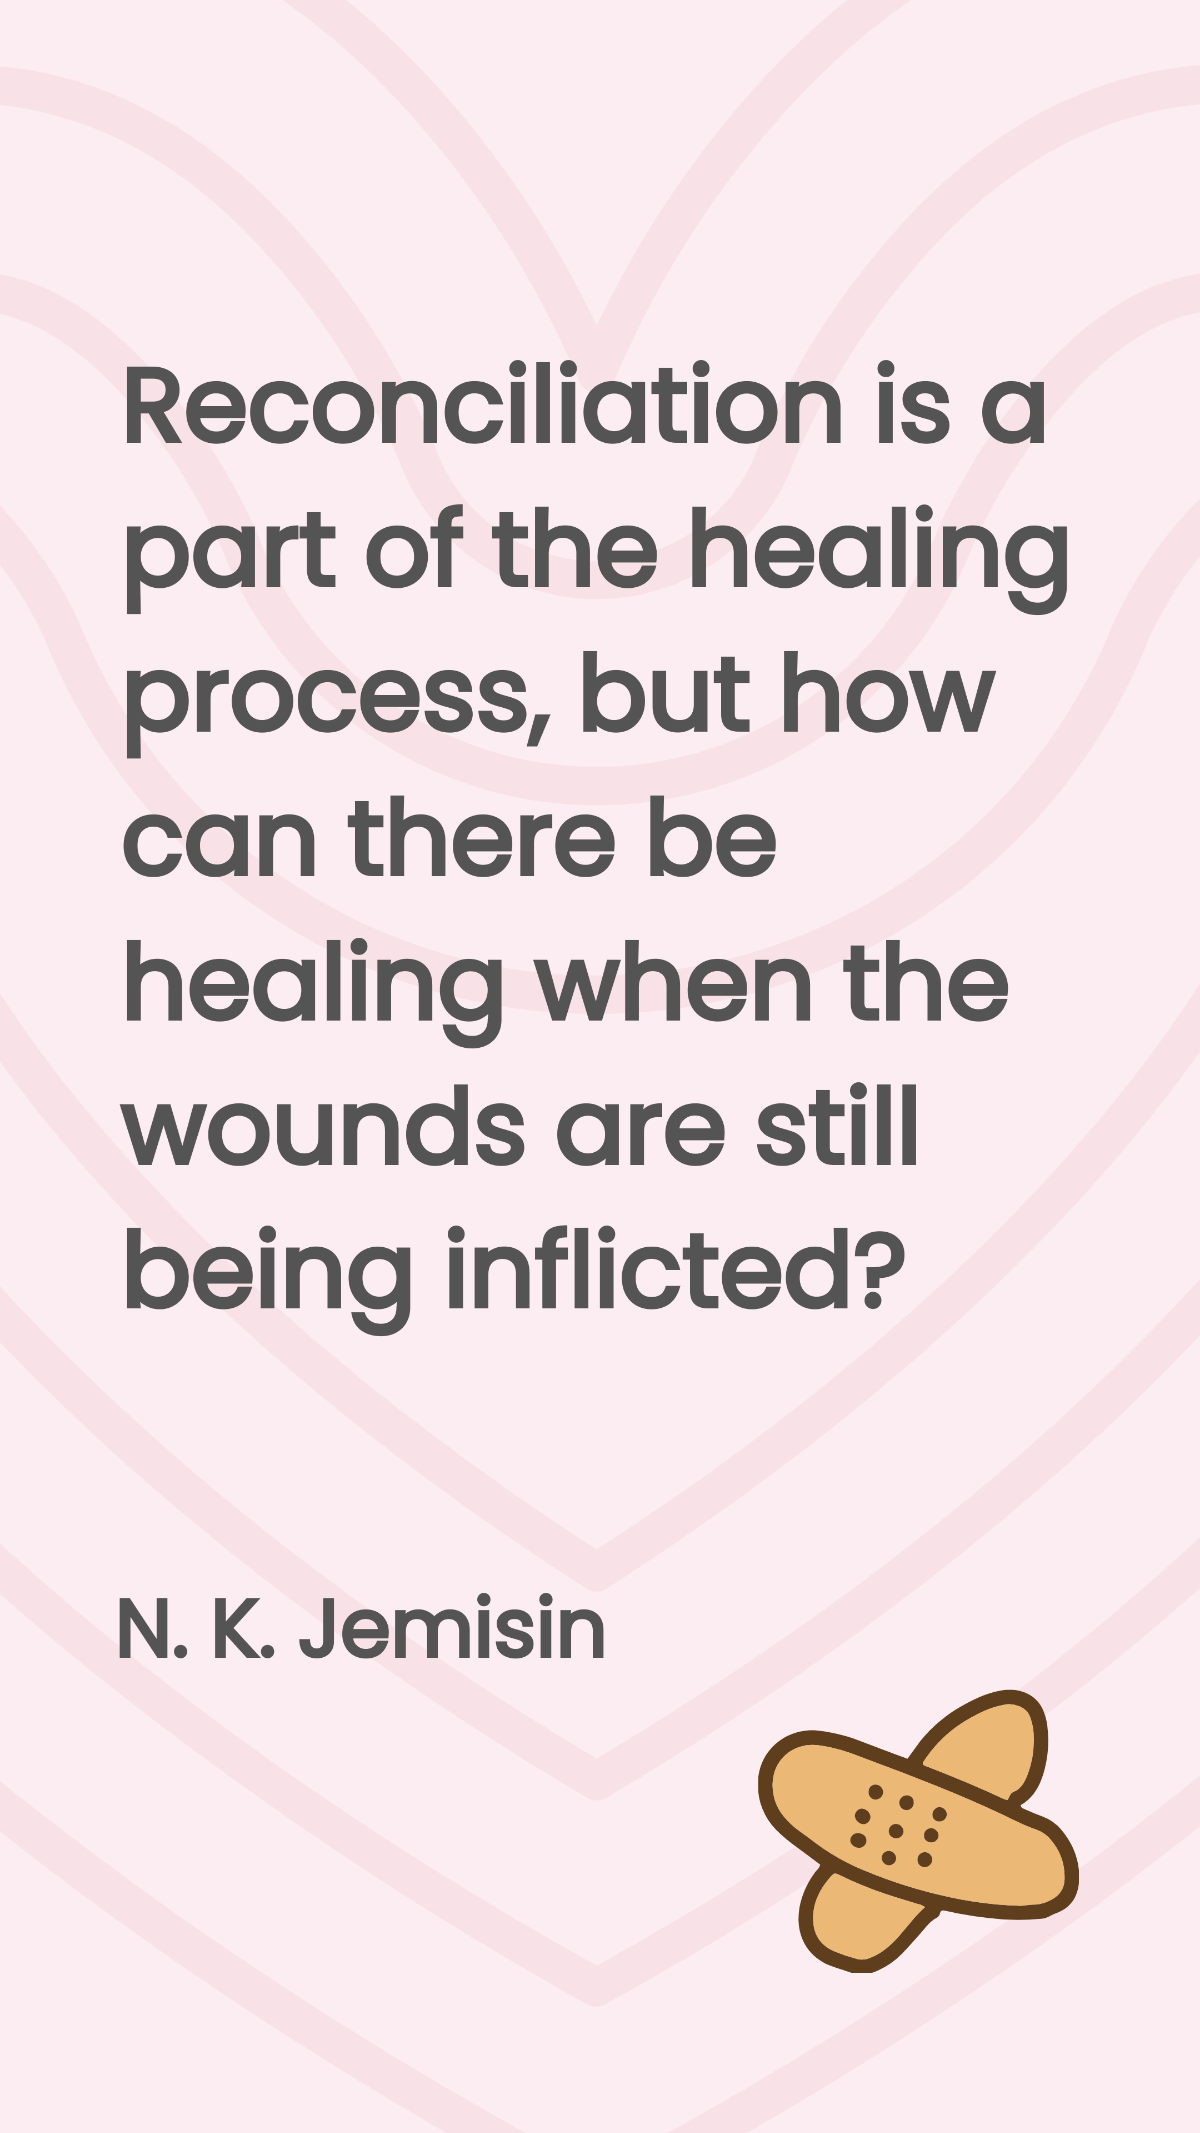 Free N. K. Jemisin - Reconciliation is a part of the healing process, but how can there be healing when the wounds are still being inflicted? Template